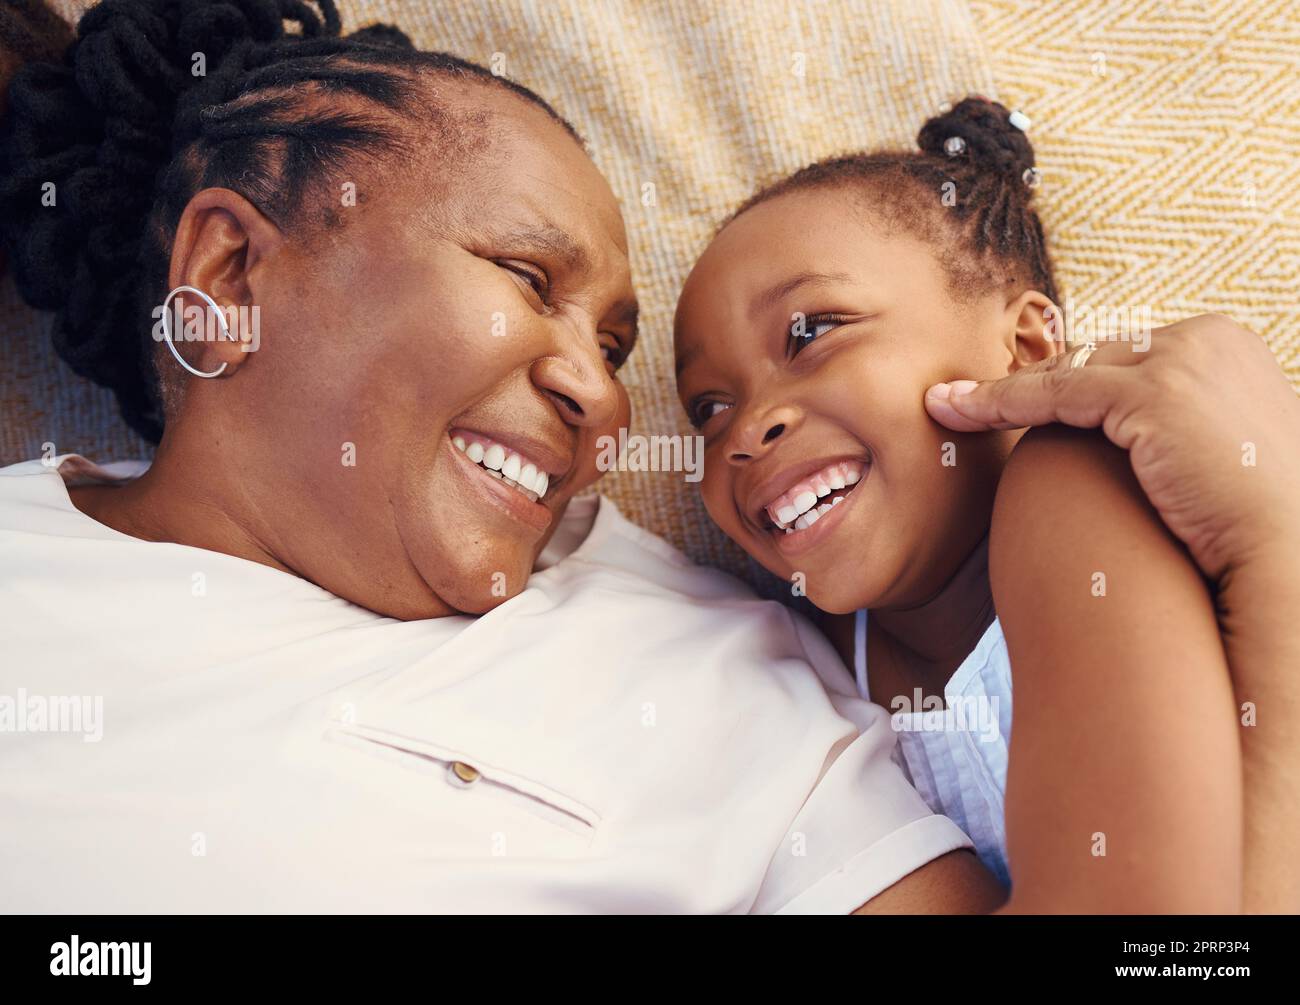 Happy, smile and family of a black grandma and child in happiness relaxing and lying on a bed at home. Senior African grandmother and little girl in joyful, love and smiling together in the bedroom Stock Photo